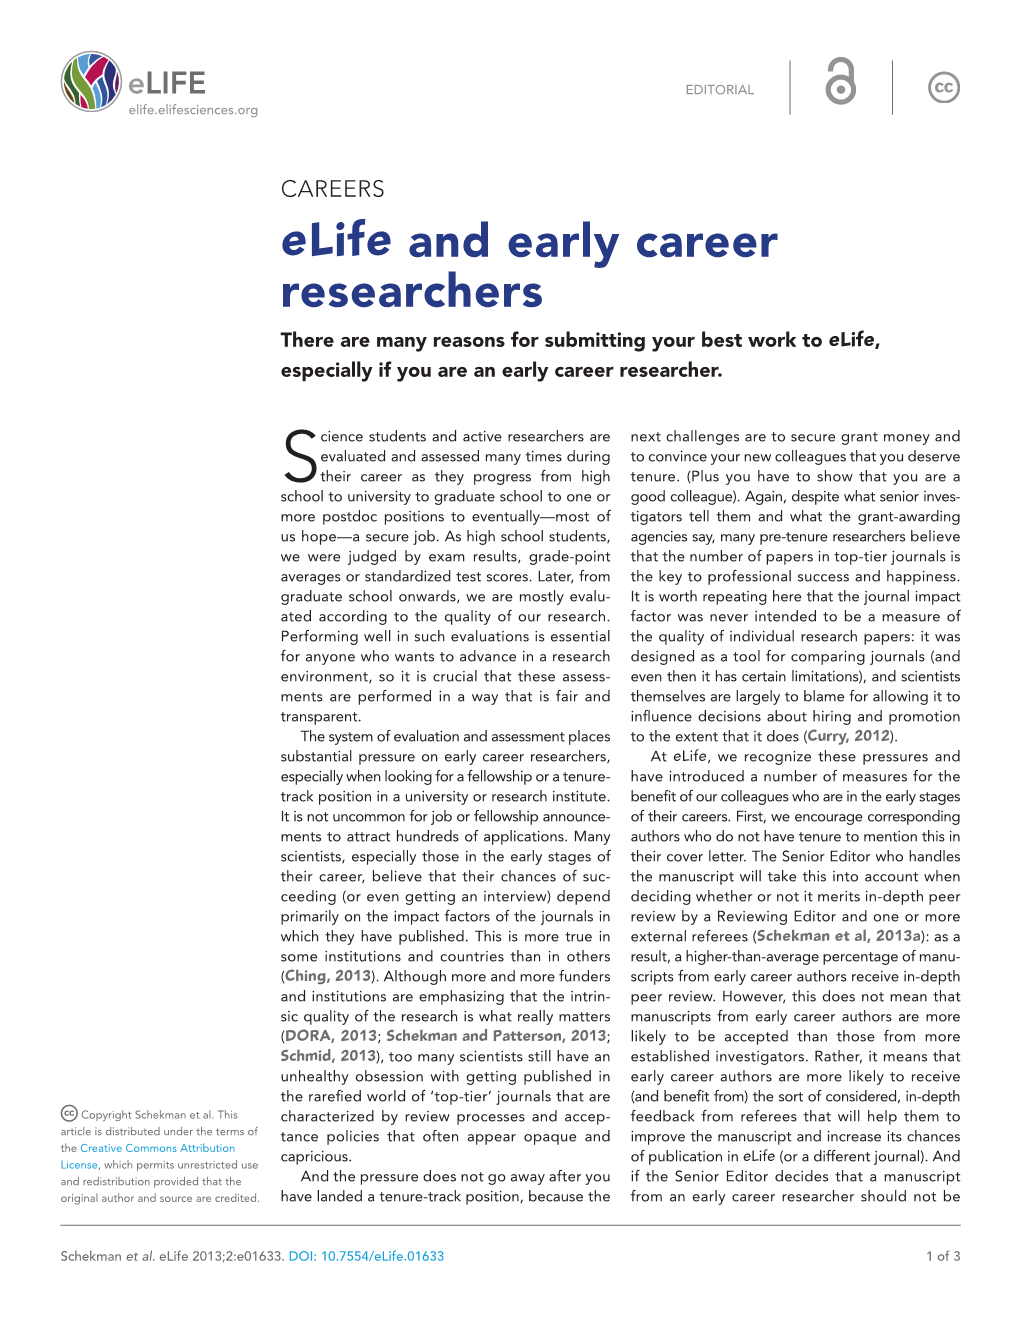 Elife and Early Career Researchers There Are Many Reasons for Submitting Your Best Work to Elife, Especially If You Are an Early Career Researcher